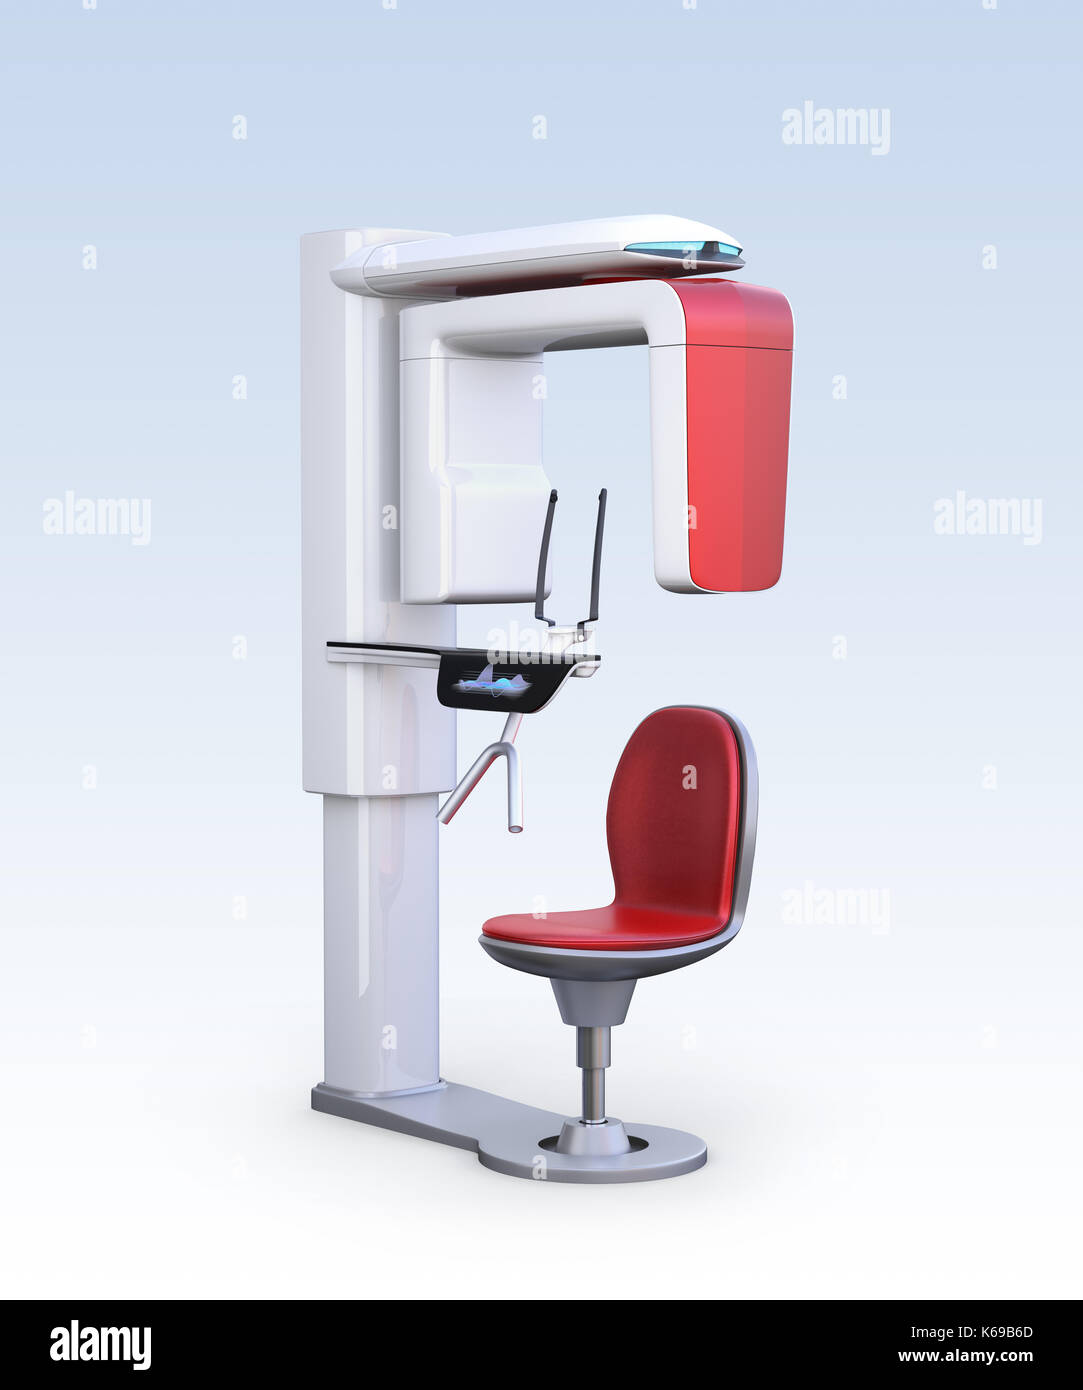 Dental 3D X-ray machine with patient chair isolated on gradient background. 3D rendering image. Stock Photo